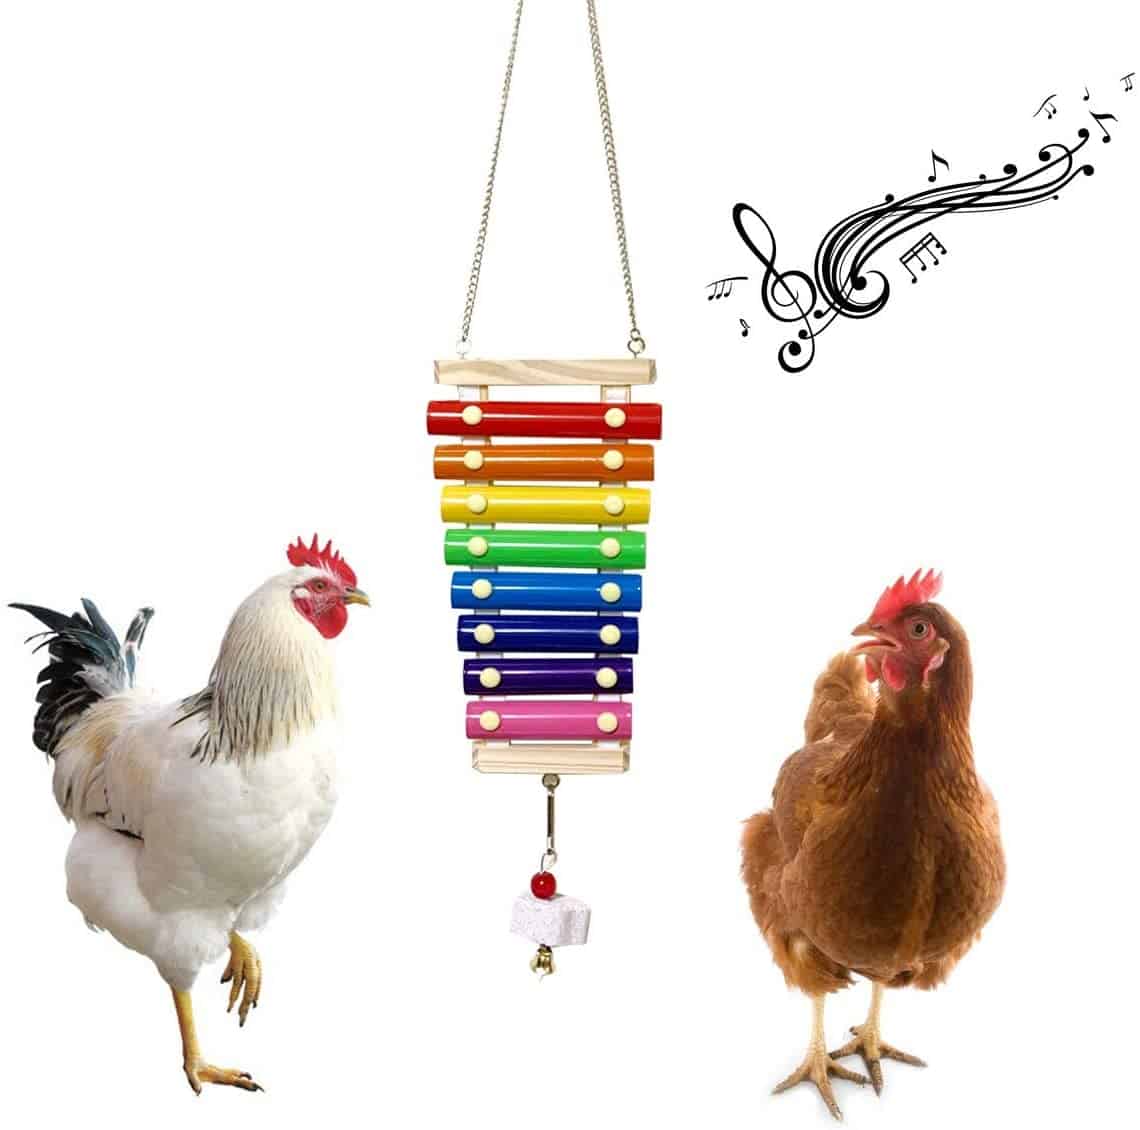 chicken enrichment toys include this chicken xylophone